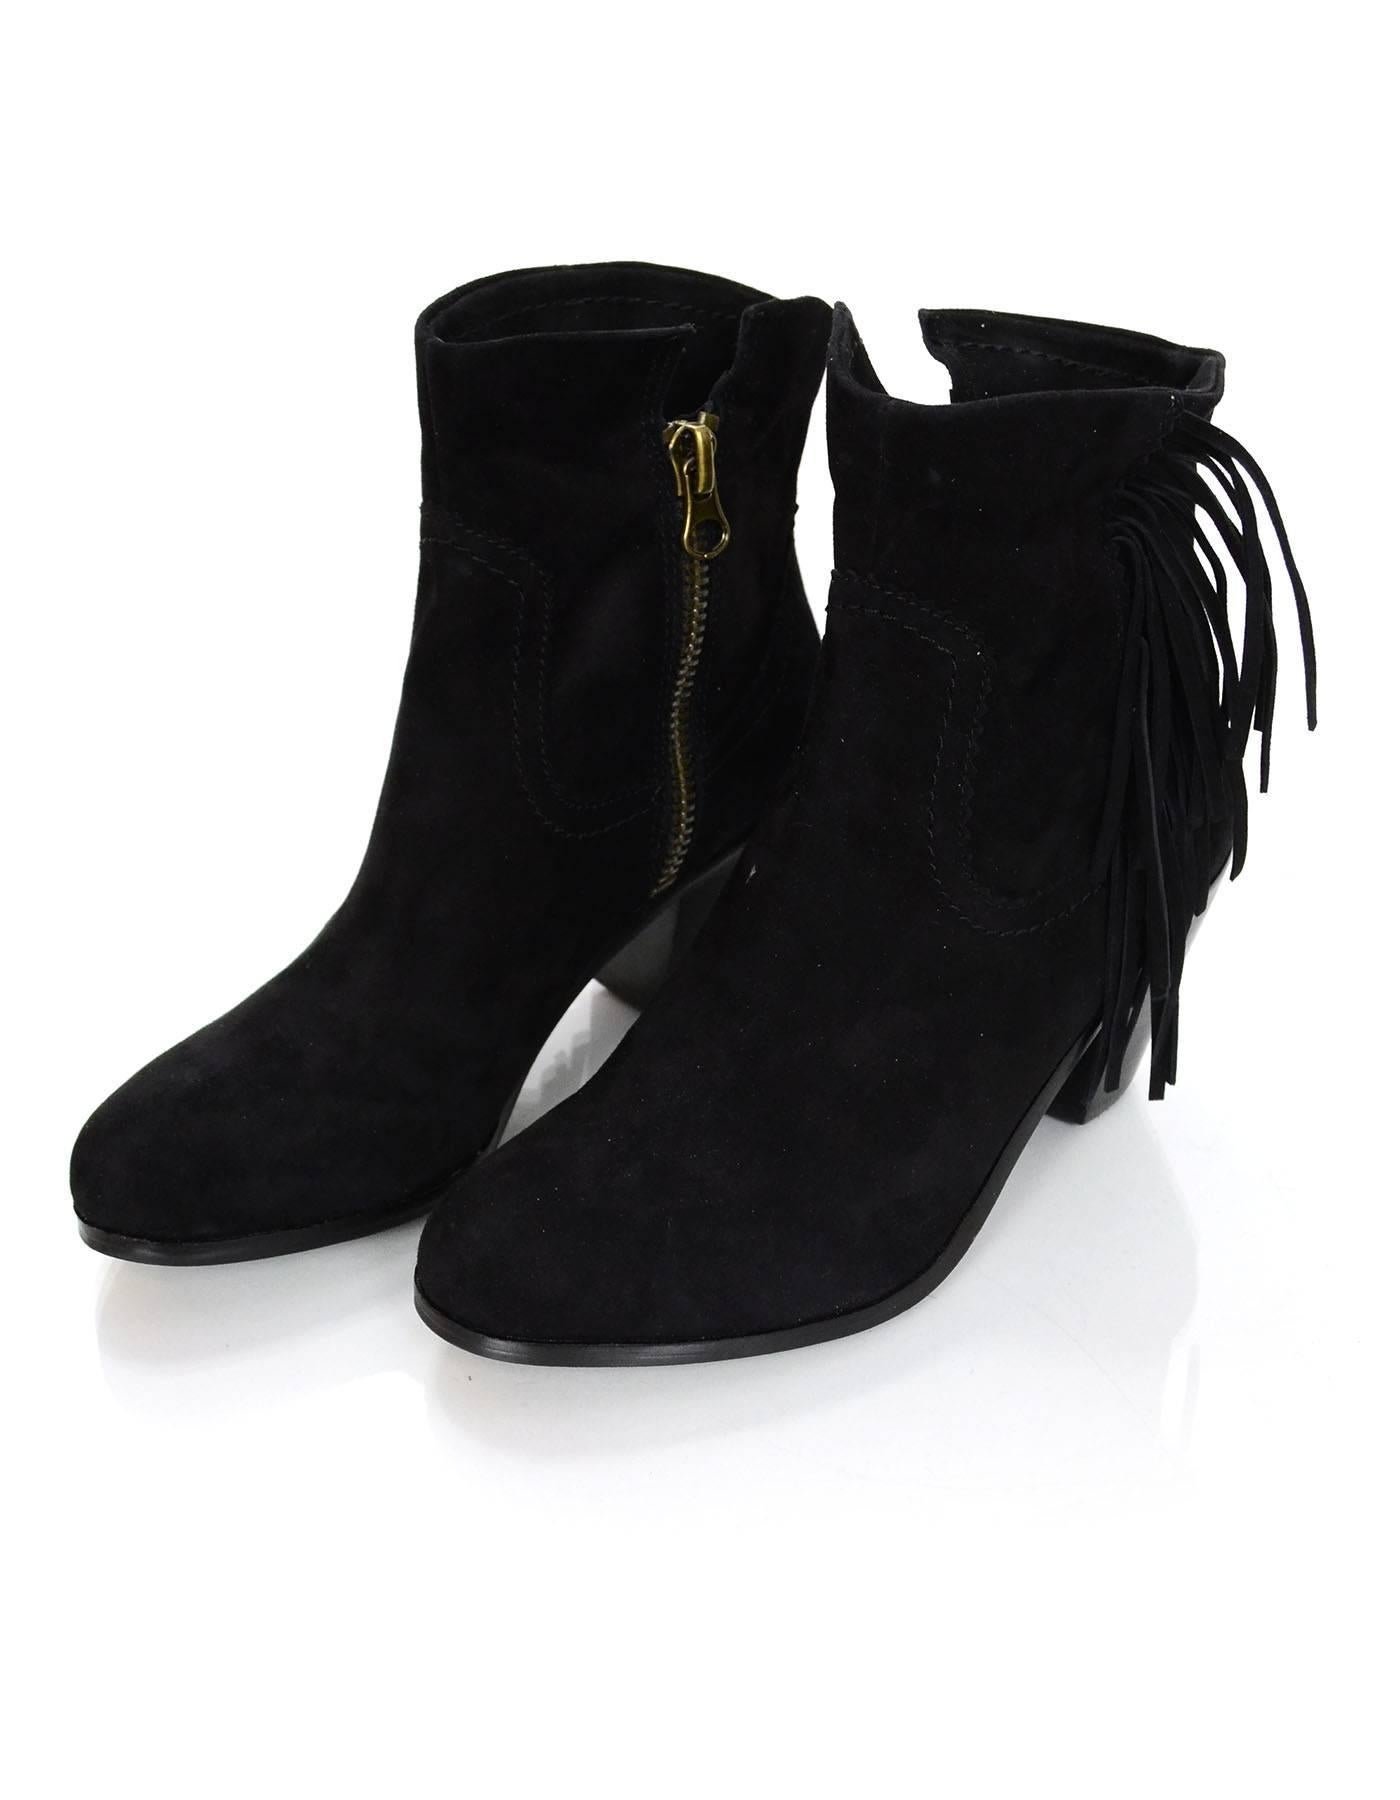 Sam Edelman Black Suede Louie Fringe Ankle Boots Sz 8M

Made In: China
Color: Black
Materials: Suede
Closure/Opening: Side zip closure
Sole Stamp: Same Edelman
Retail Price: $150 + tax
Overall Condition: Excellent pre-owned condition
Marked Size: